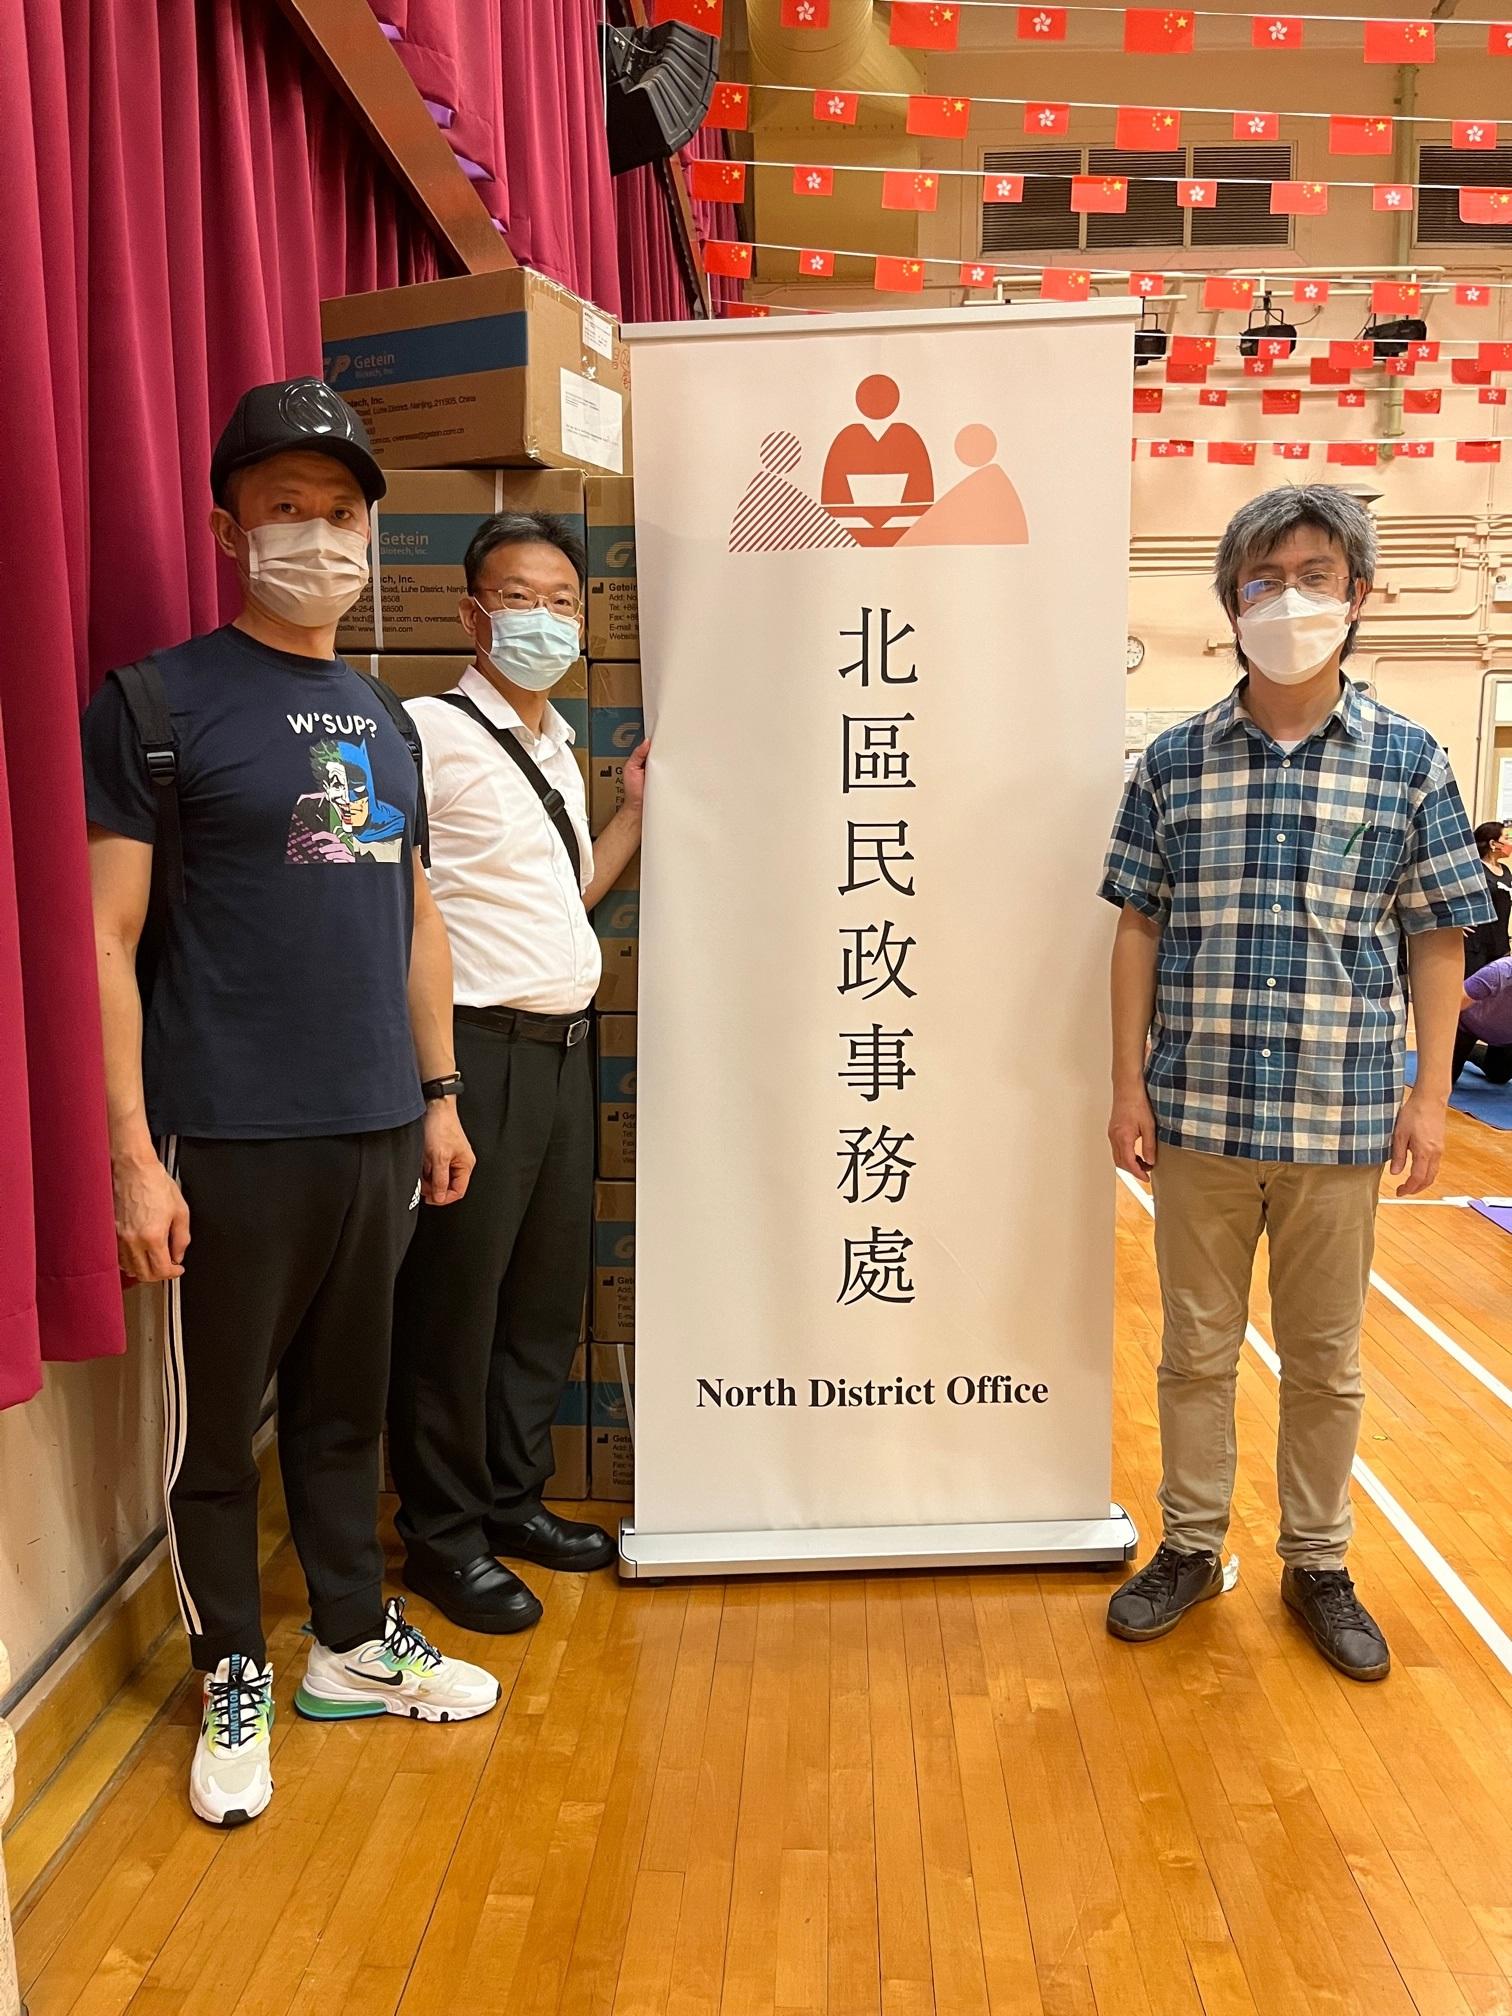 The North District Office today (July 6) distributed COVID-19 rapid test kits to households, cleansing workers and property management staff living and working in Cheong Shing Court for voluntary testing through the property management company.
